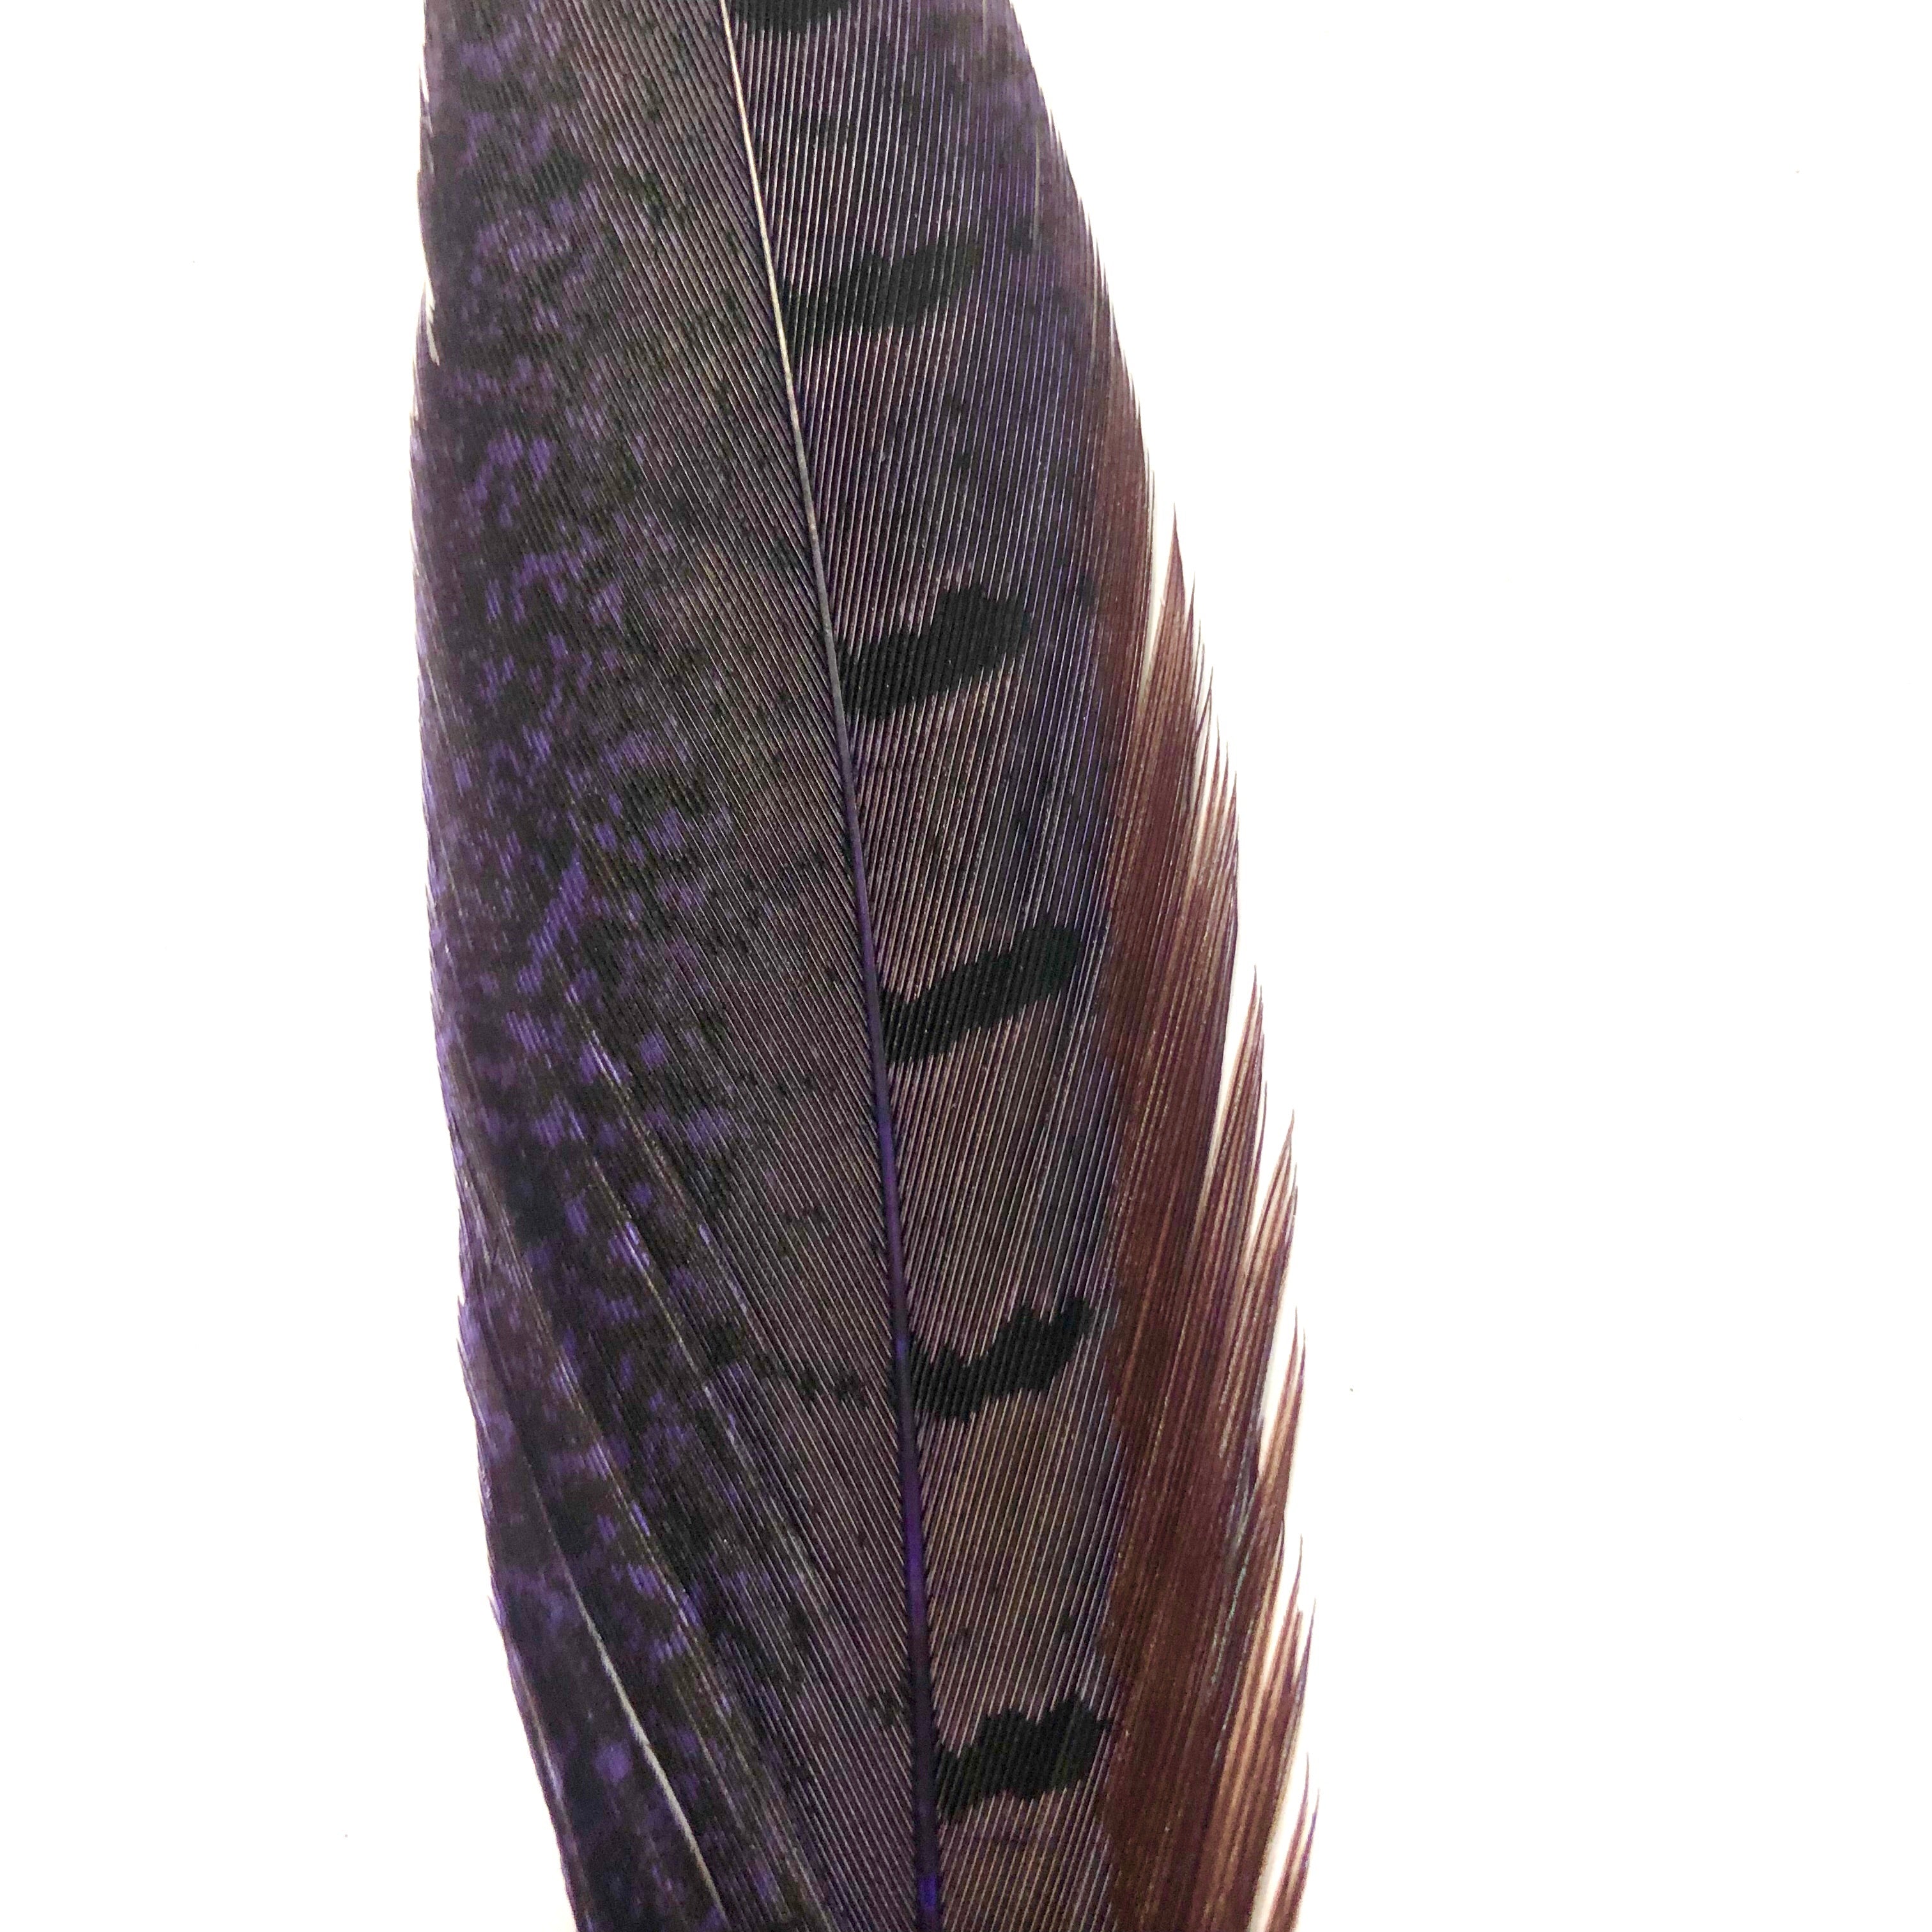 6" to 10" Ringneck Pheasant Tail Feather x 10 pcs - Purple